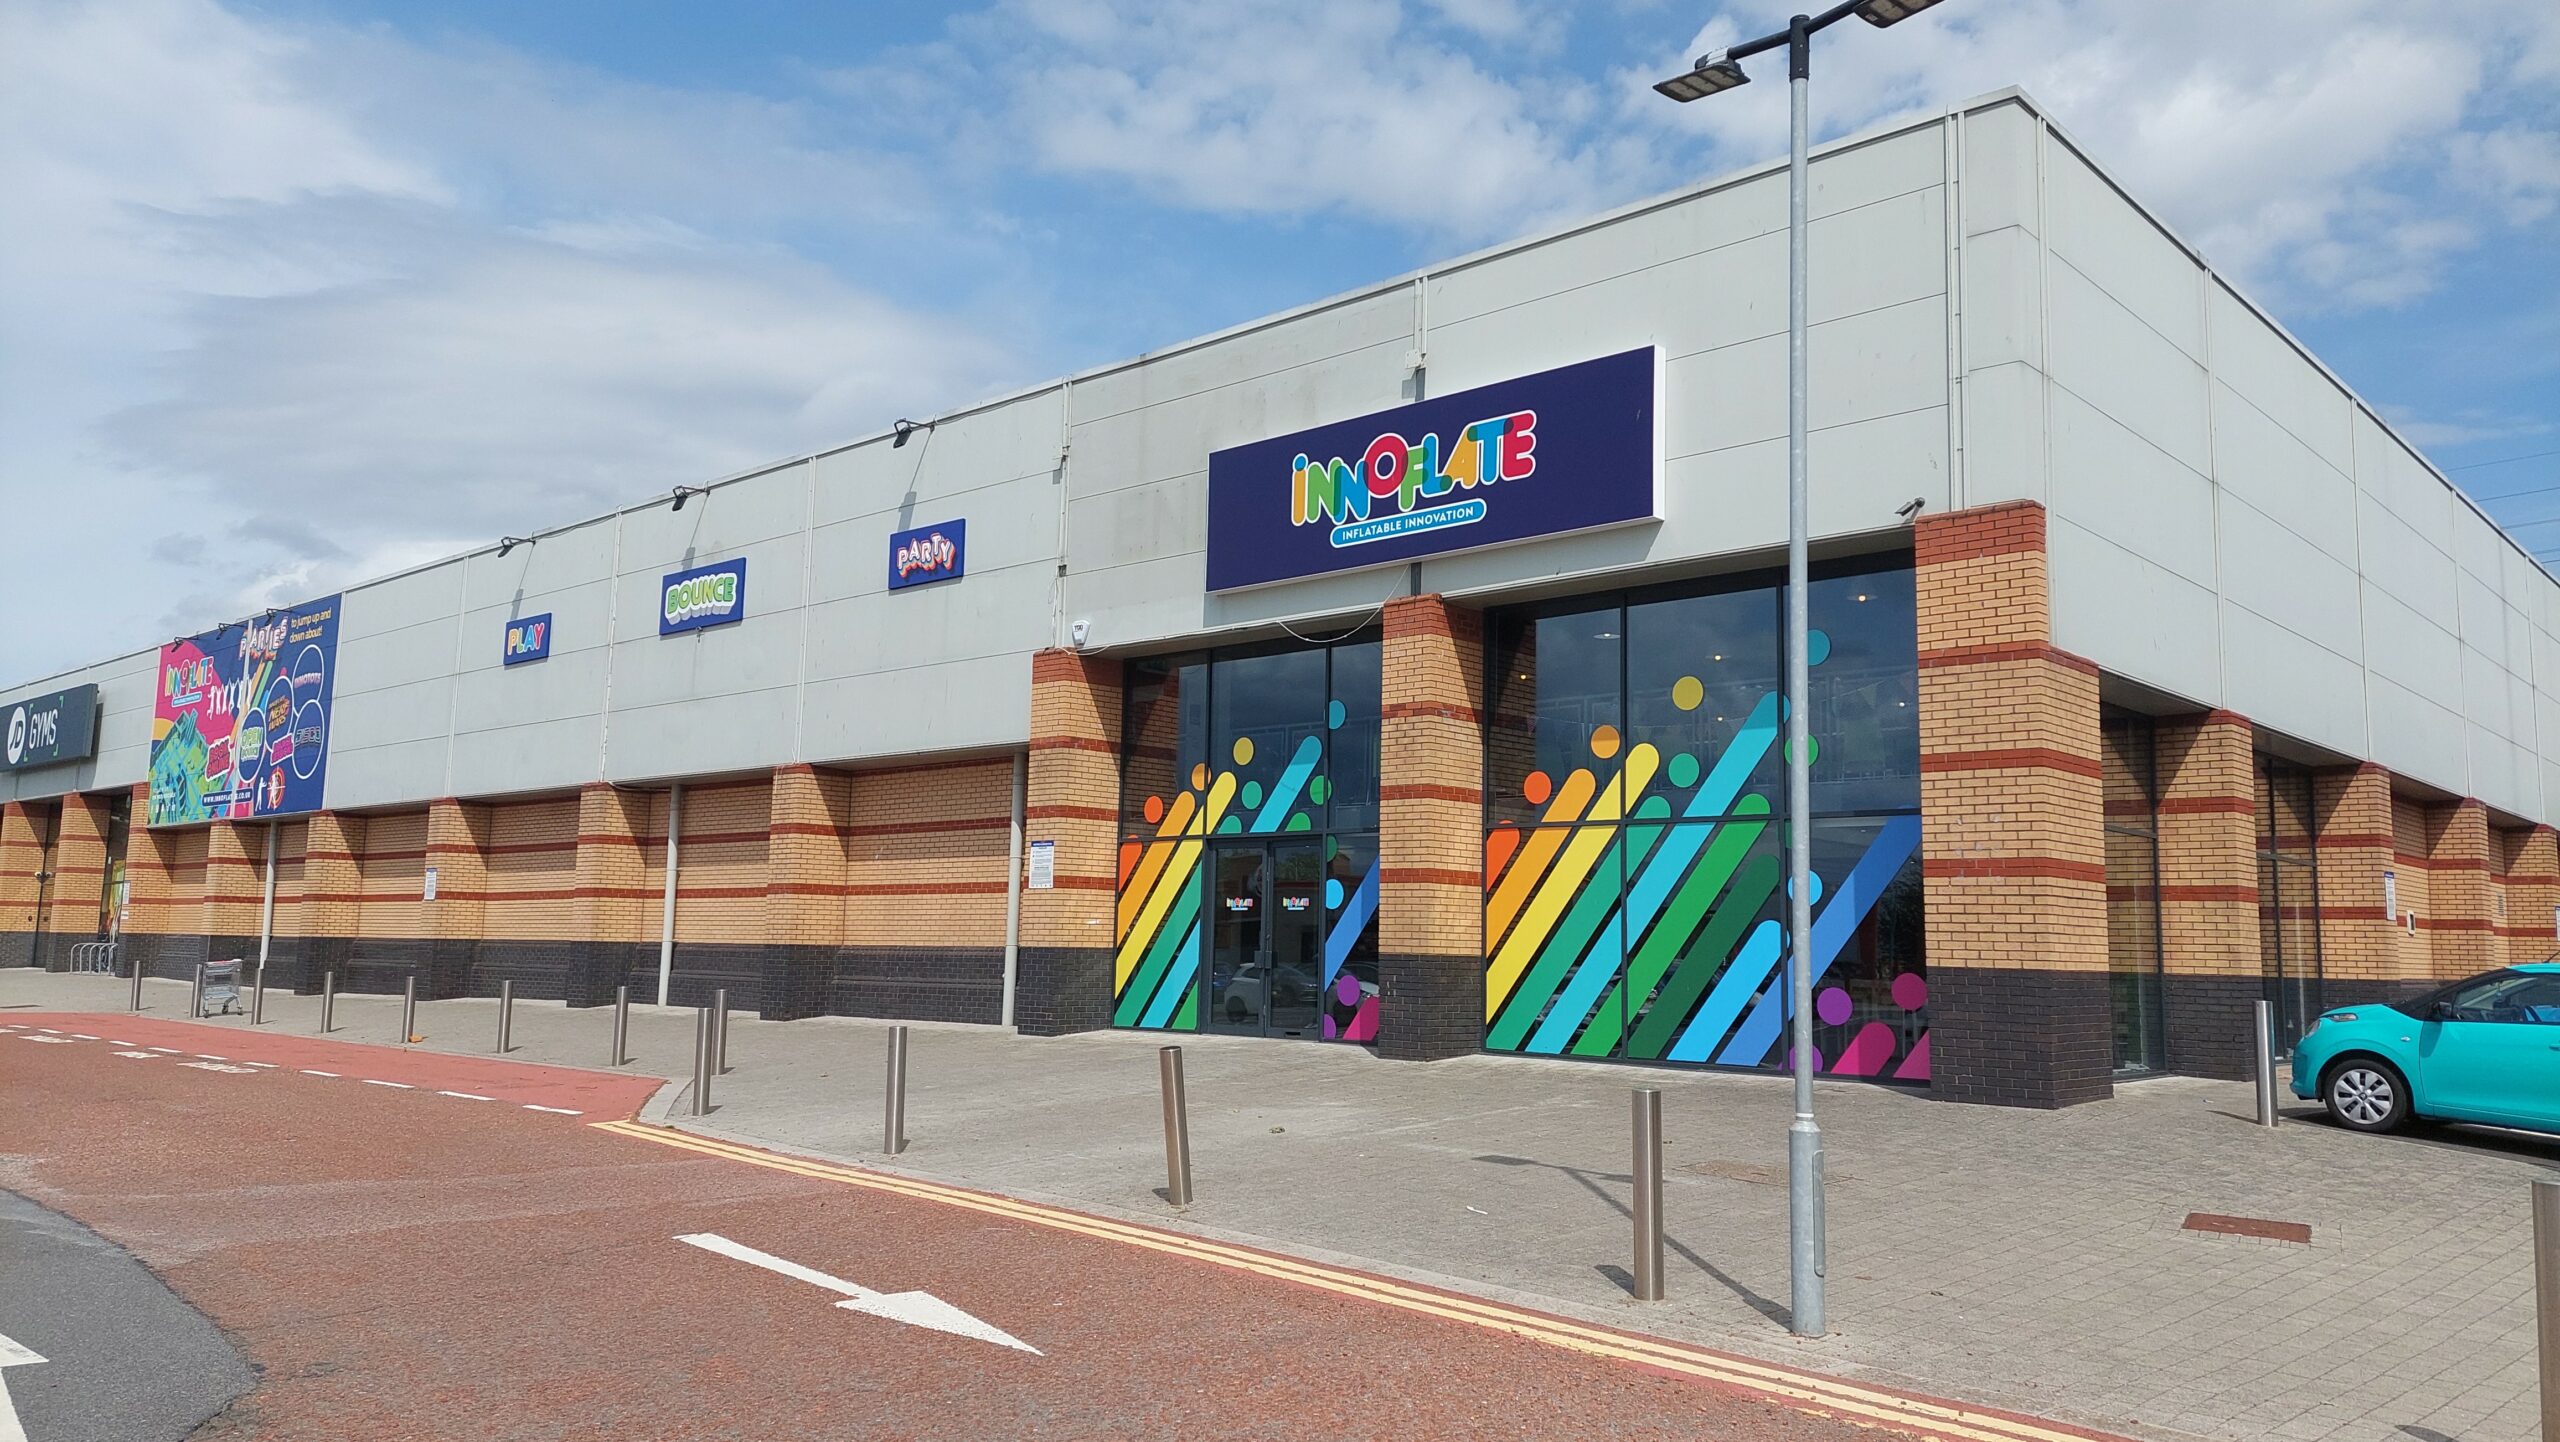 Exciting brand-new climbing and play experience opens its doors in Cardiff  - The Cardiff News